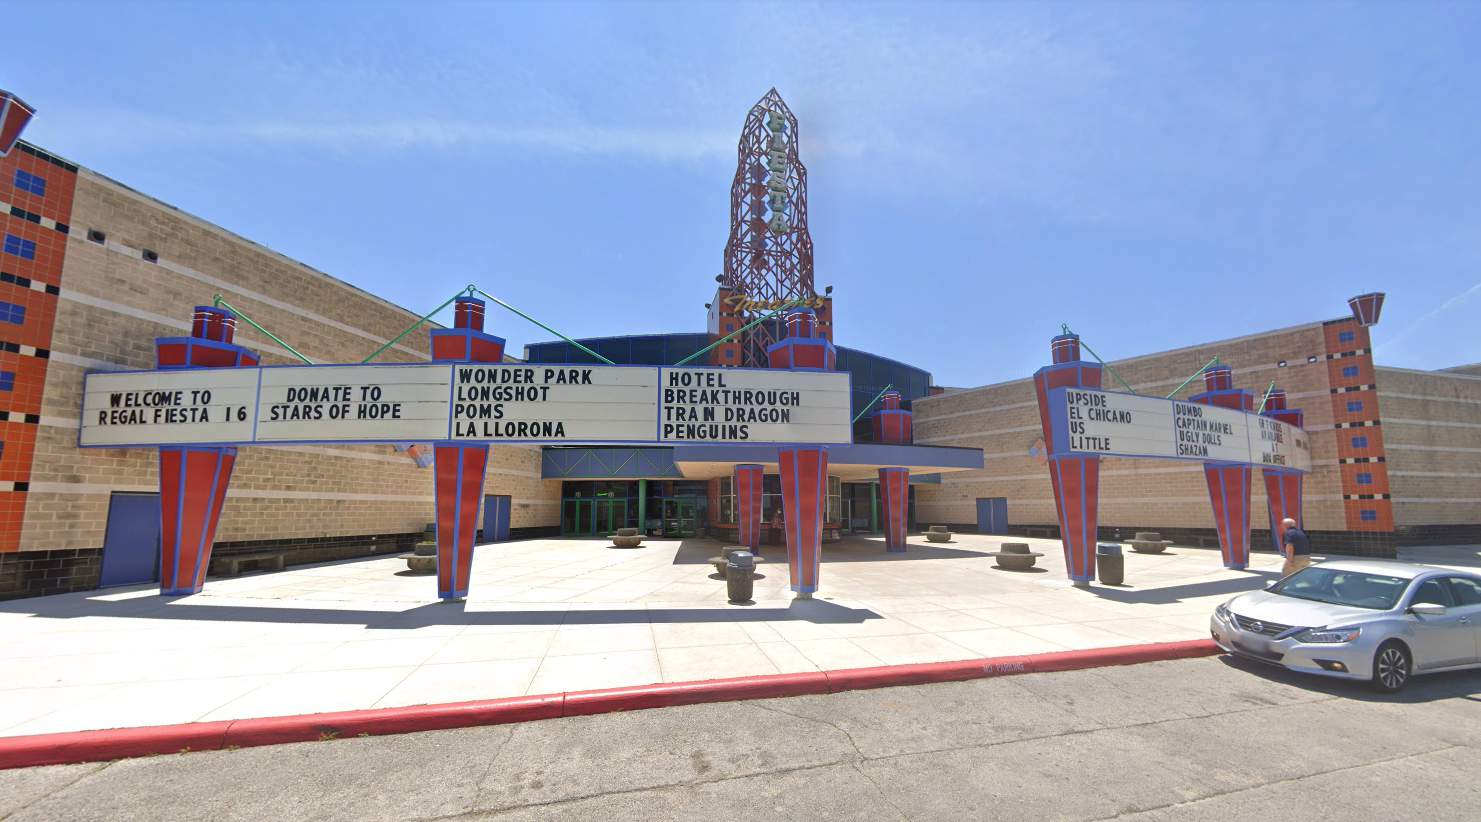 Regal Fiesta Trails movie theater closes permanently, property could be turned ‘into something entirely different’